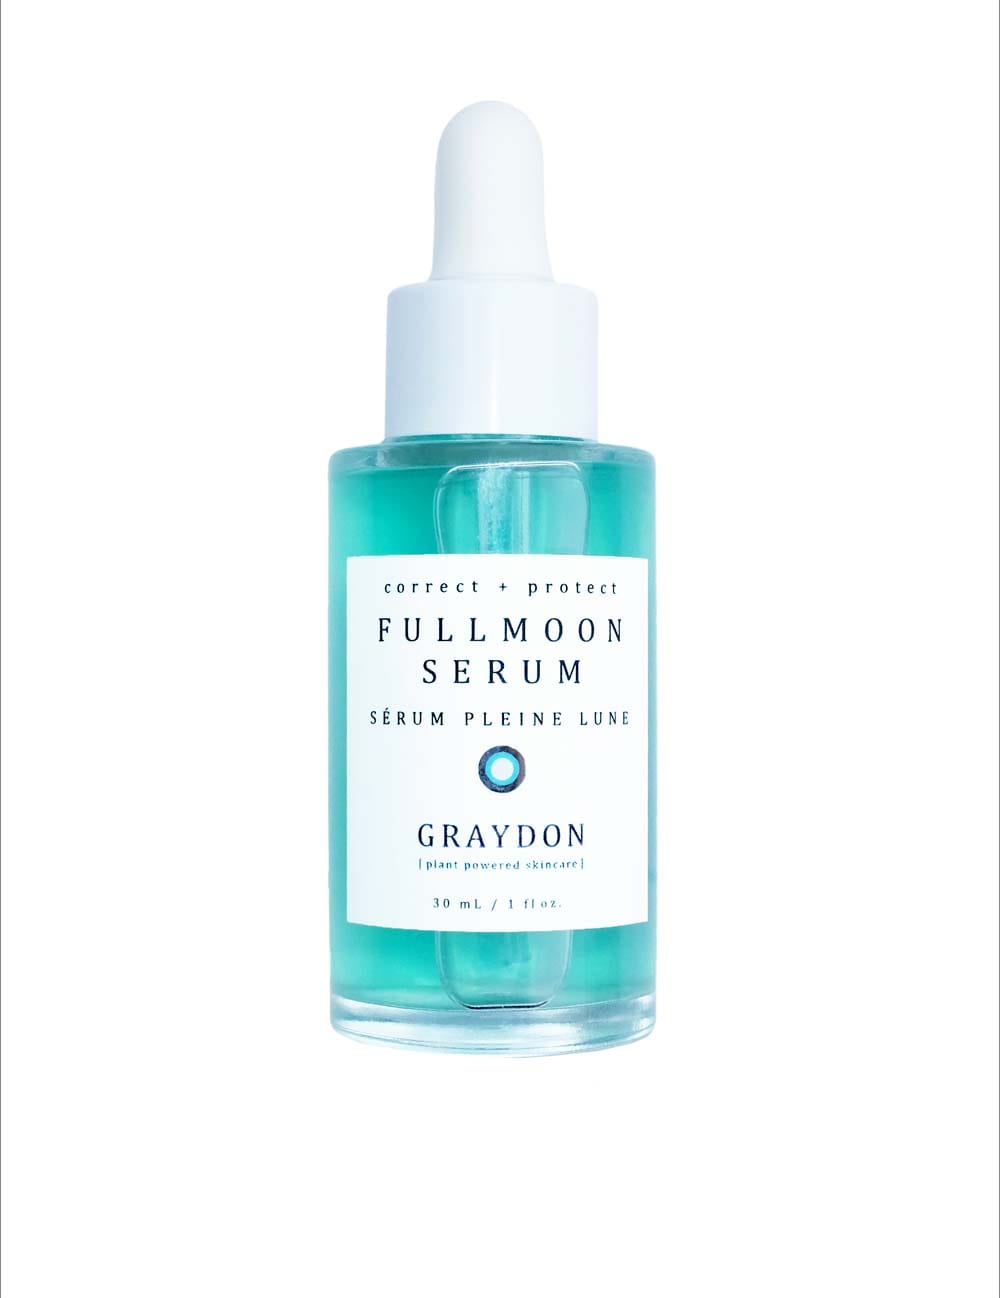 The Bridal Beauty Products Our Editors Are Currently Loving For December - fullmoon serum